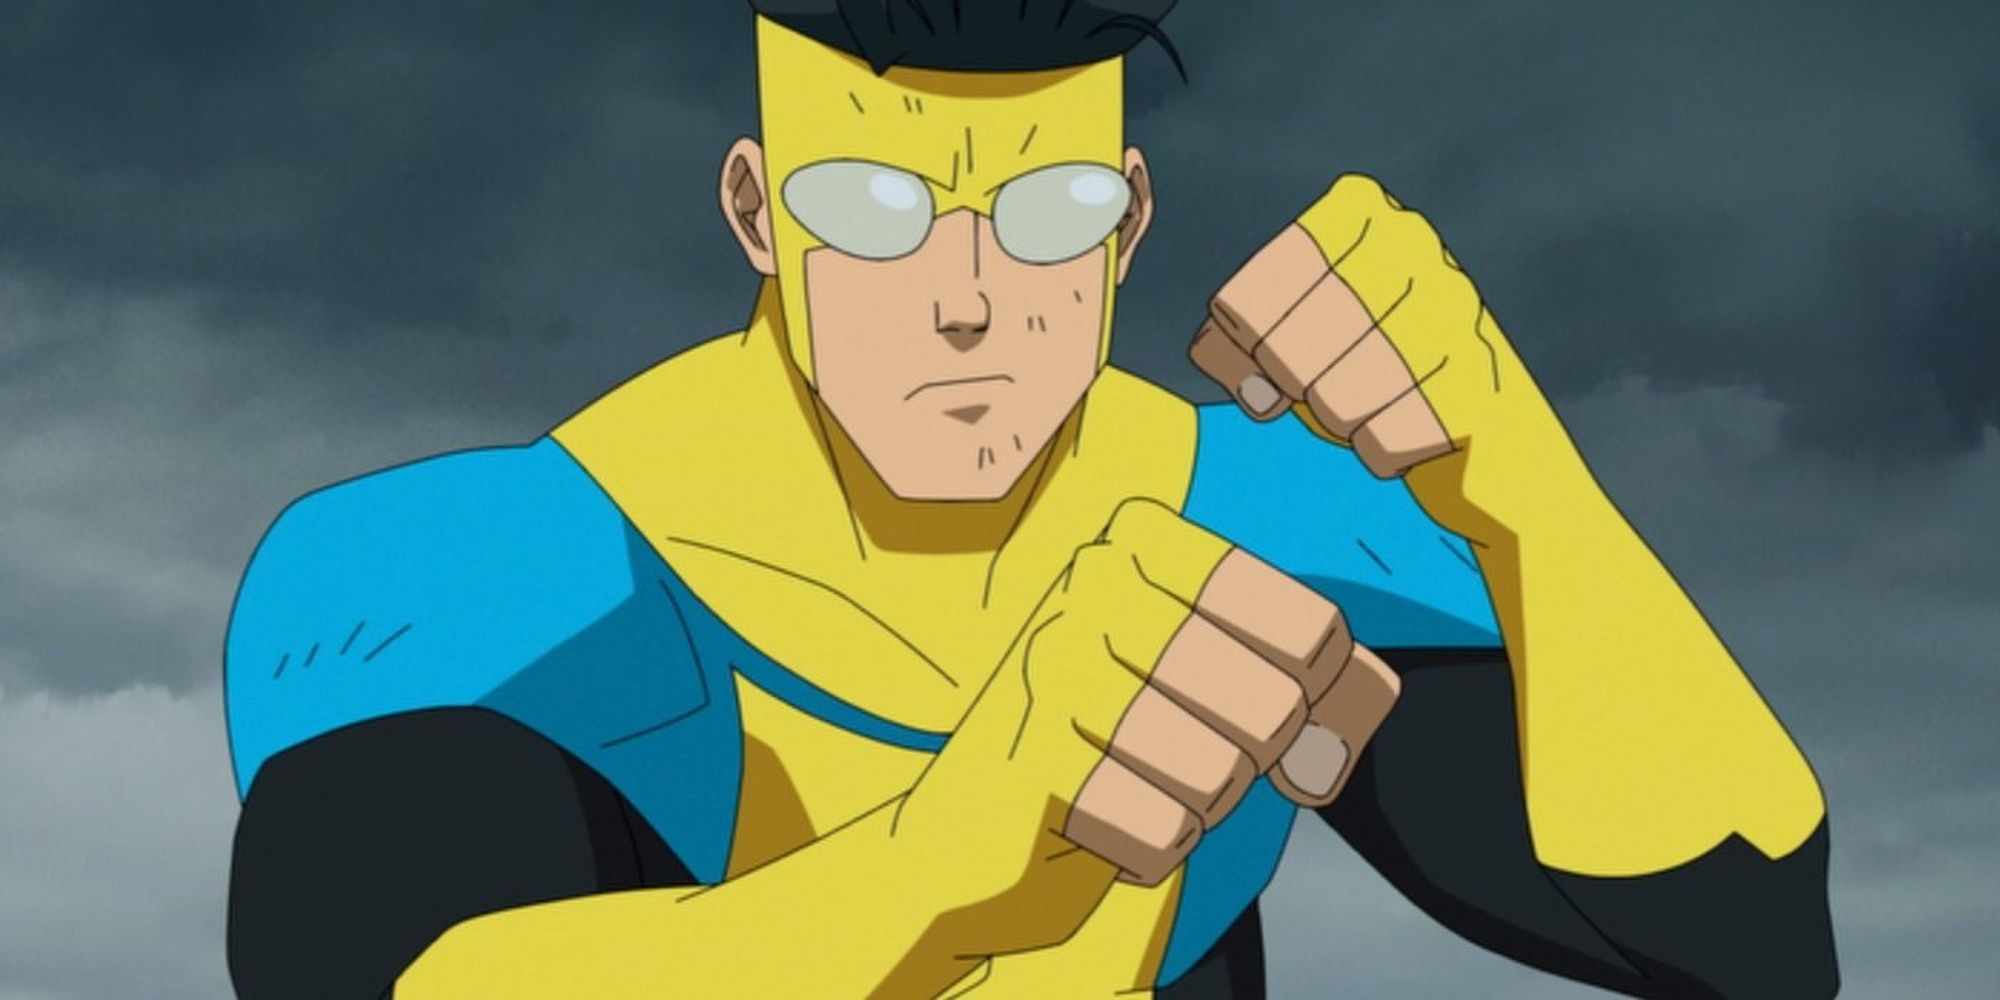 Invincible/Mark Grayson is ready to fight.